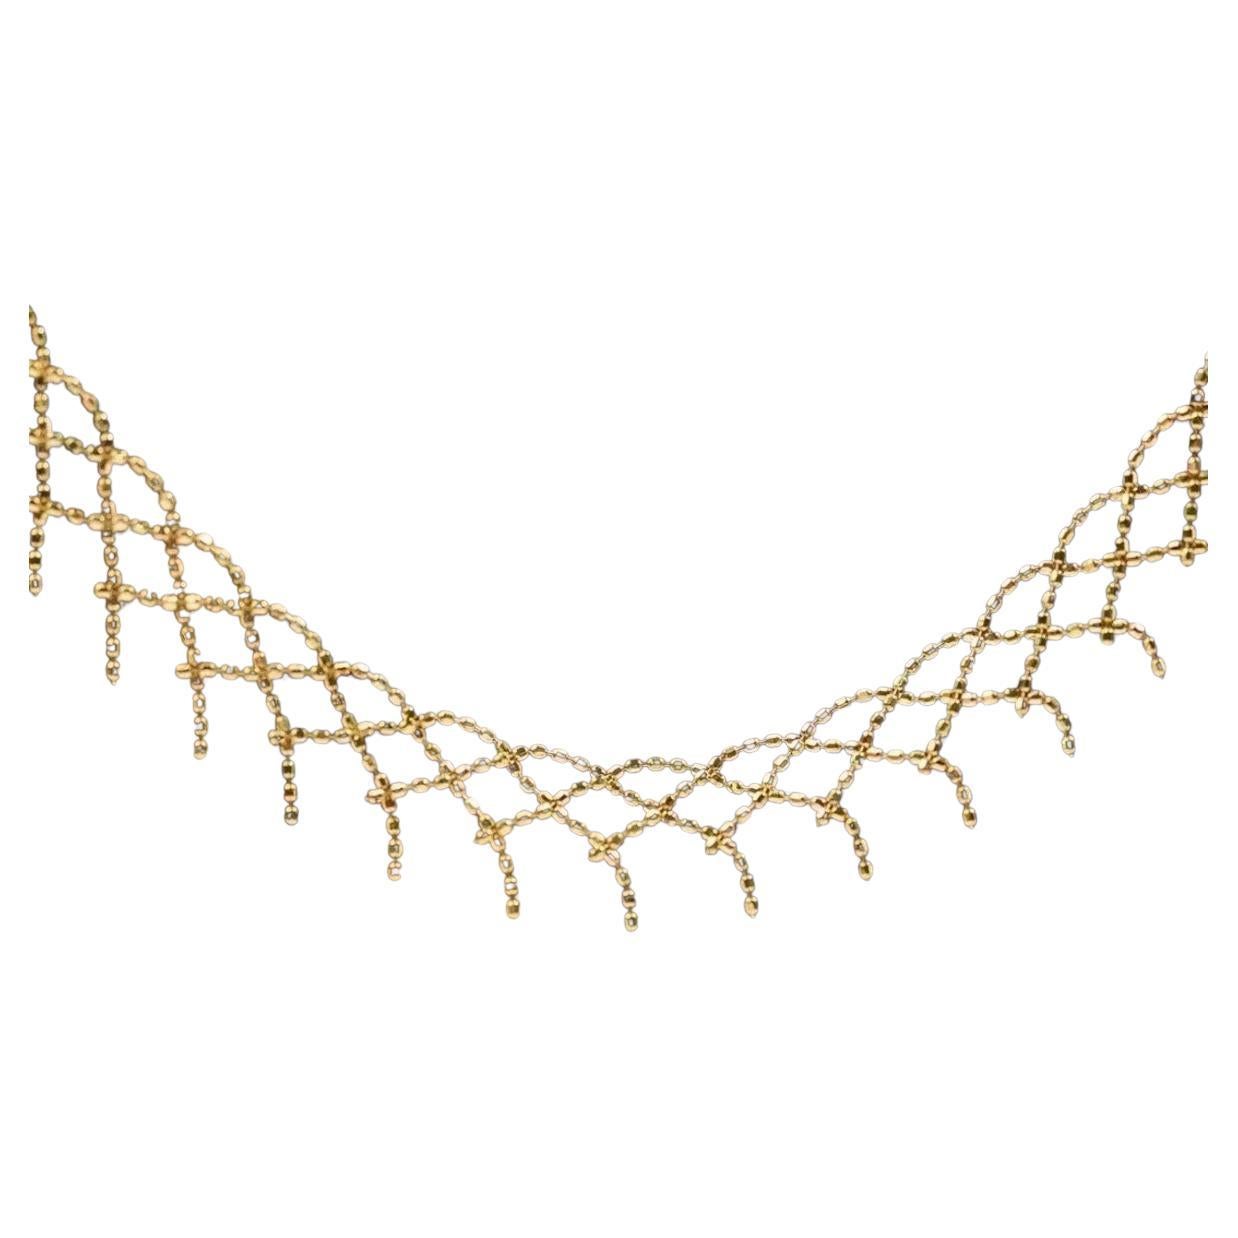 18K Gold Delicate Lace Necklace 3.98g